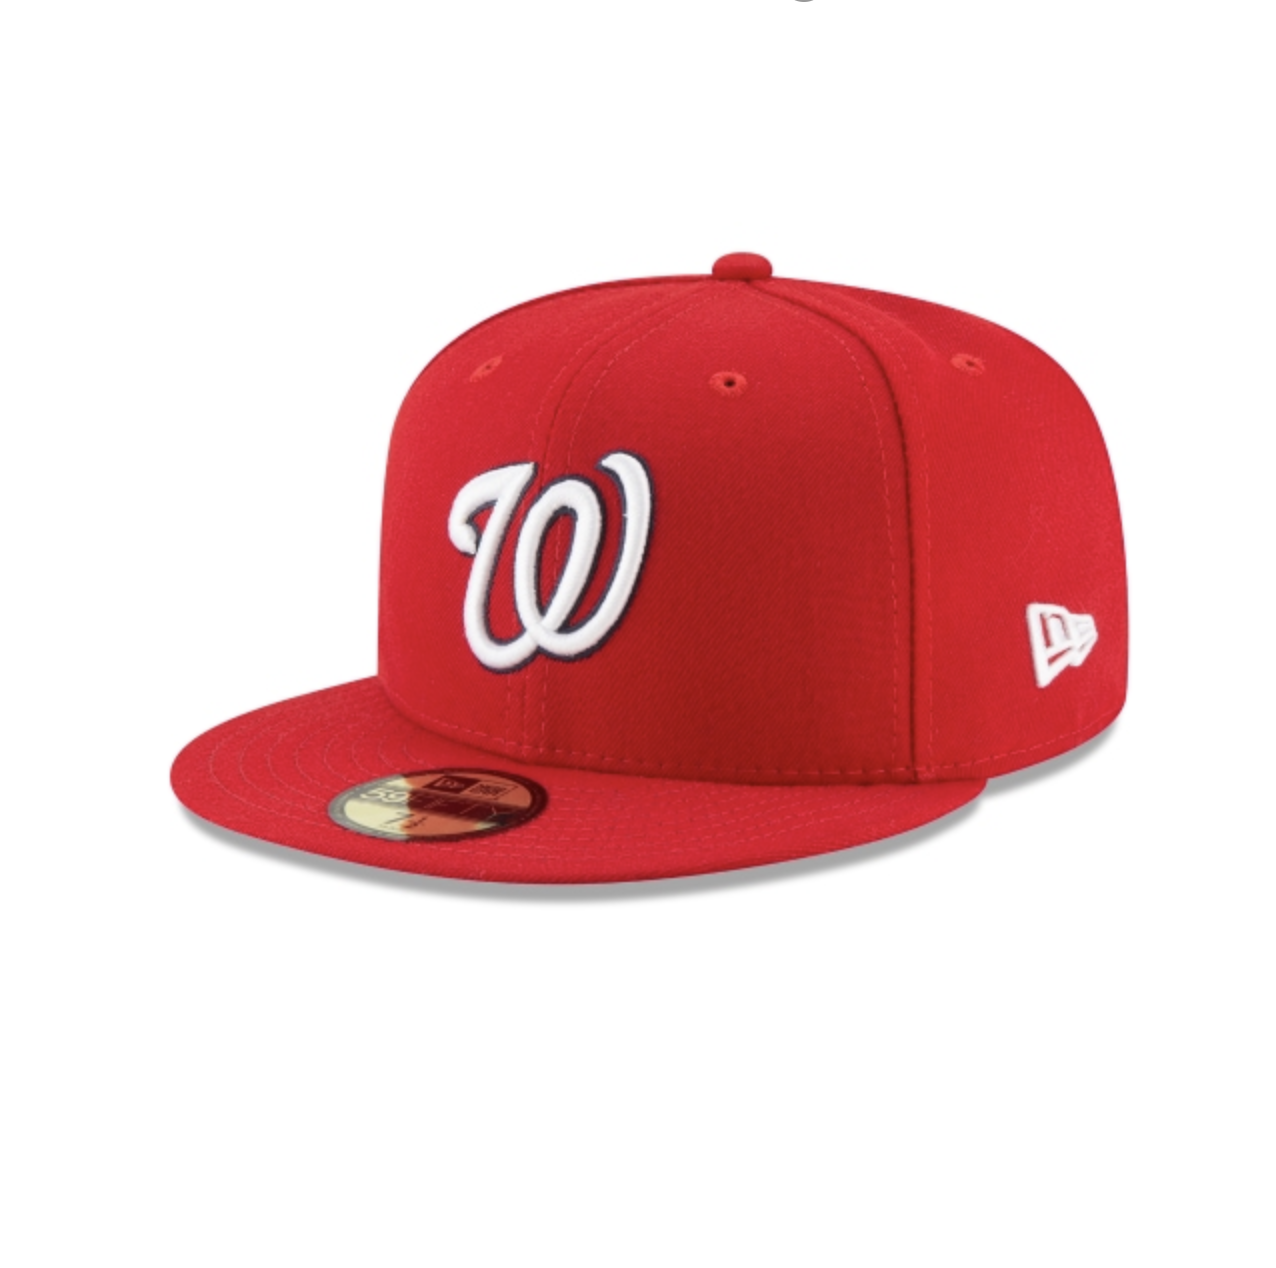 Washington Nationals New Era Alternate 2 2020 Authentic Collection On-Field 59FIFTY Fitted Hat - White